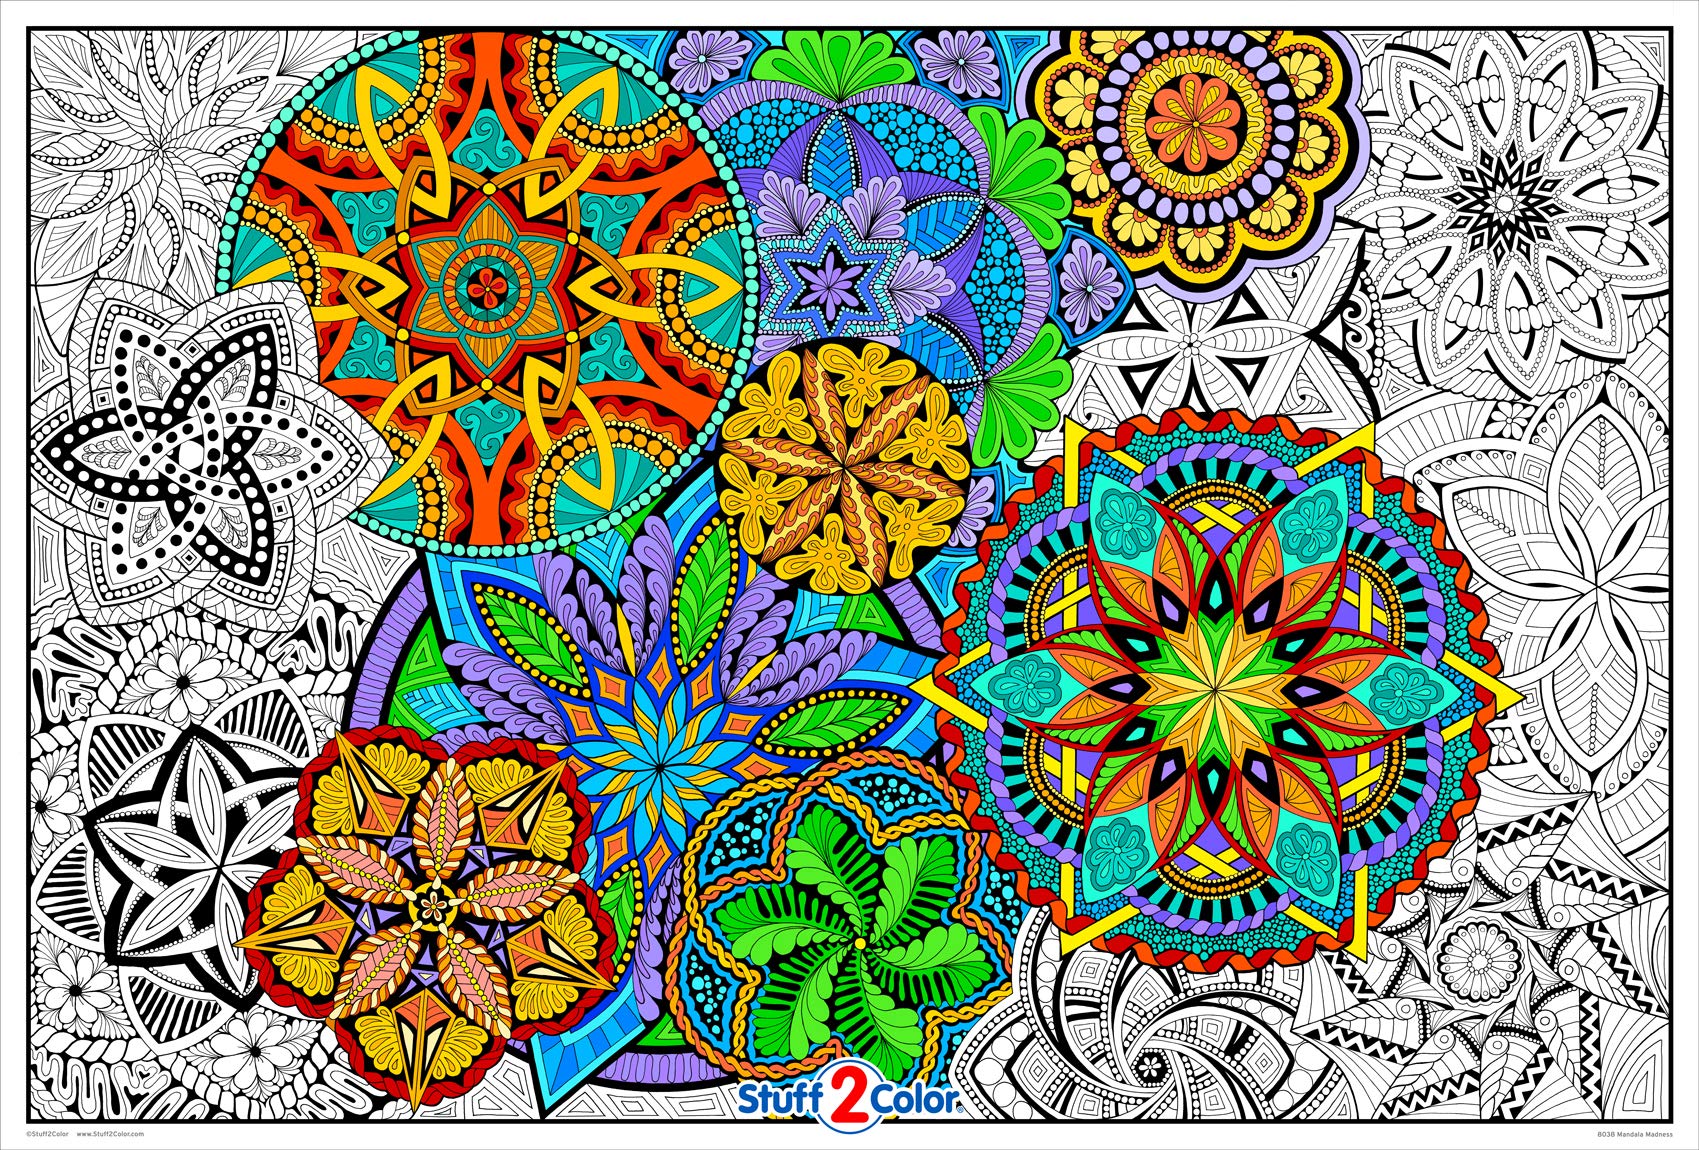 Stuffcolor giant coloring poster mandala madness for kids and adults